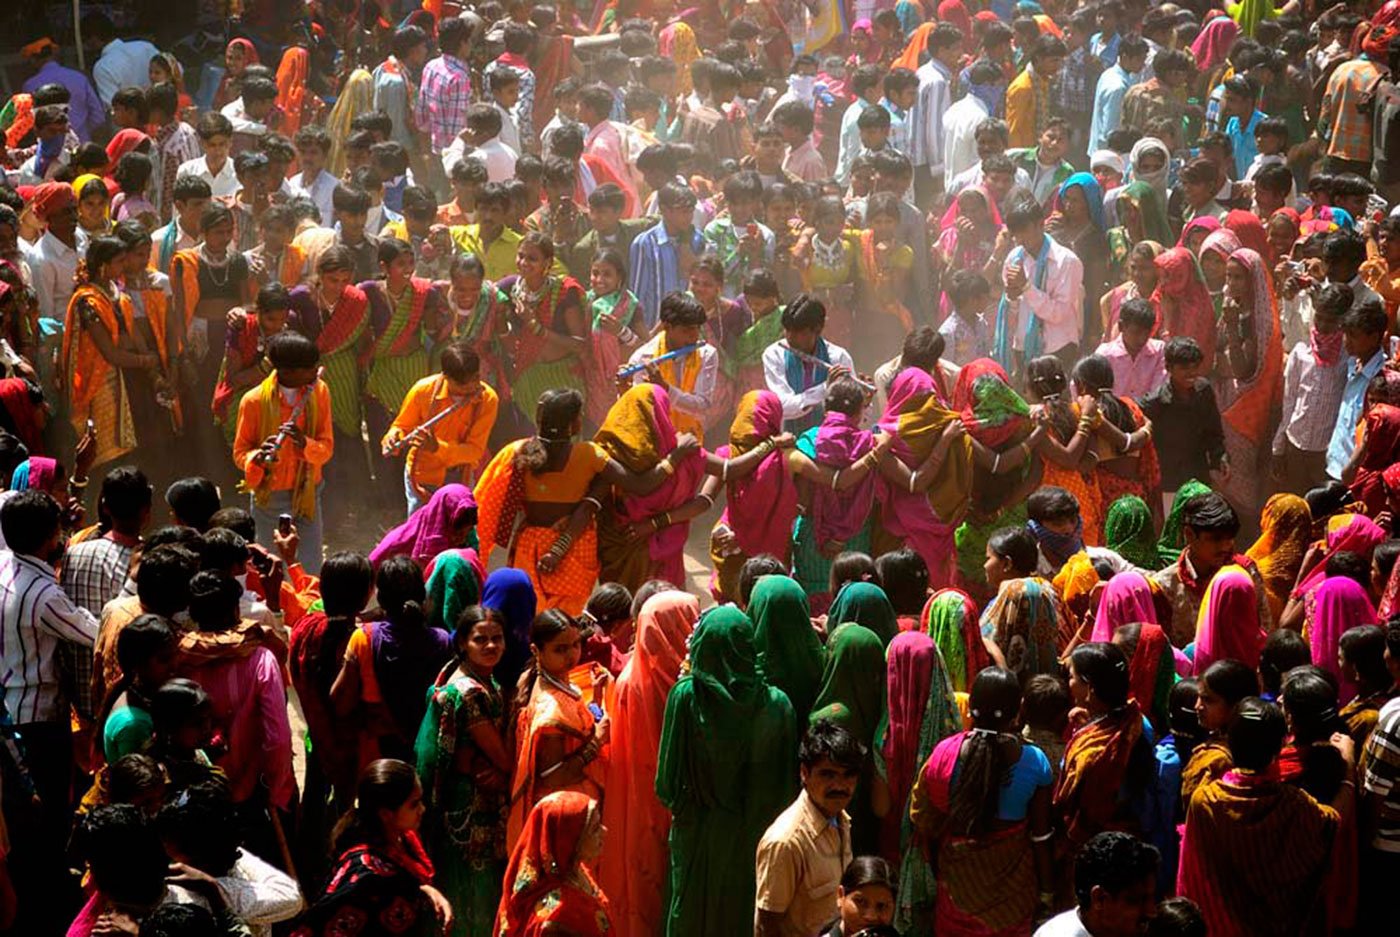 Adivasis in Bakhatgarh village dancing during the colorful Bhagoria festival, which celebrates the kharif harvest just prior to Holi in spring